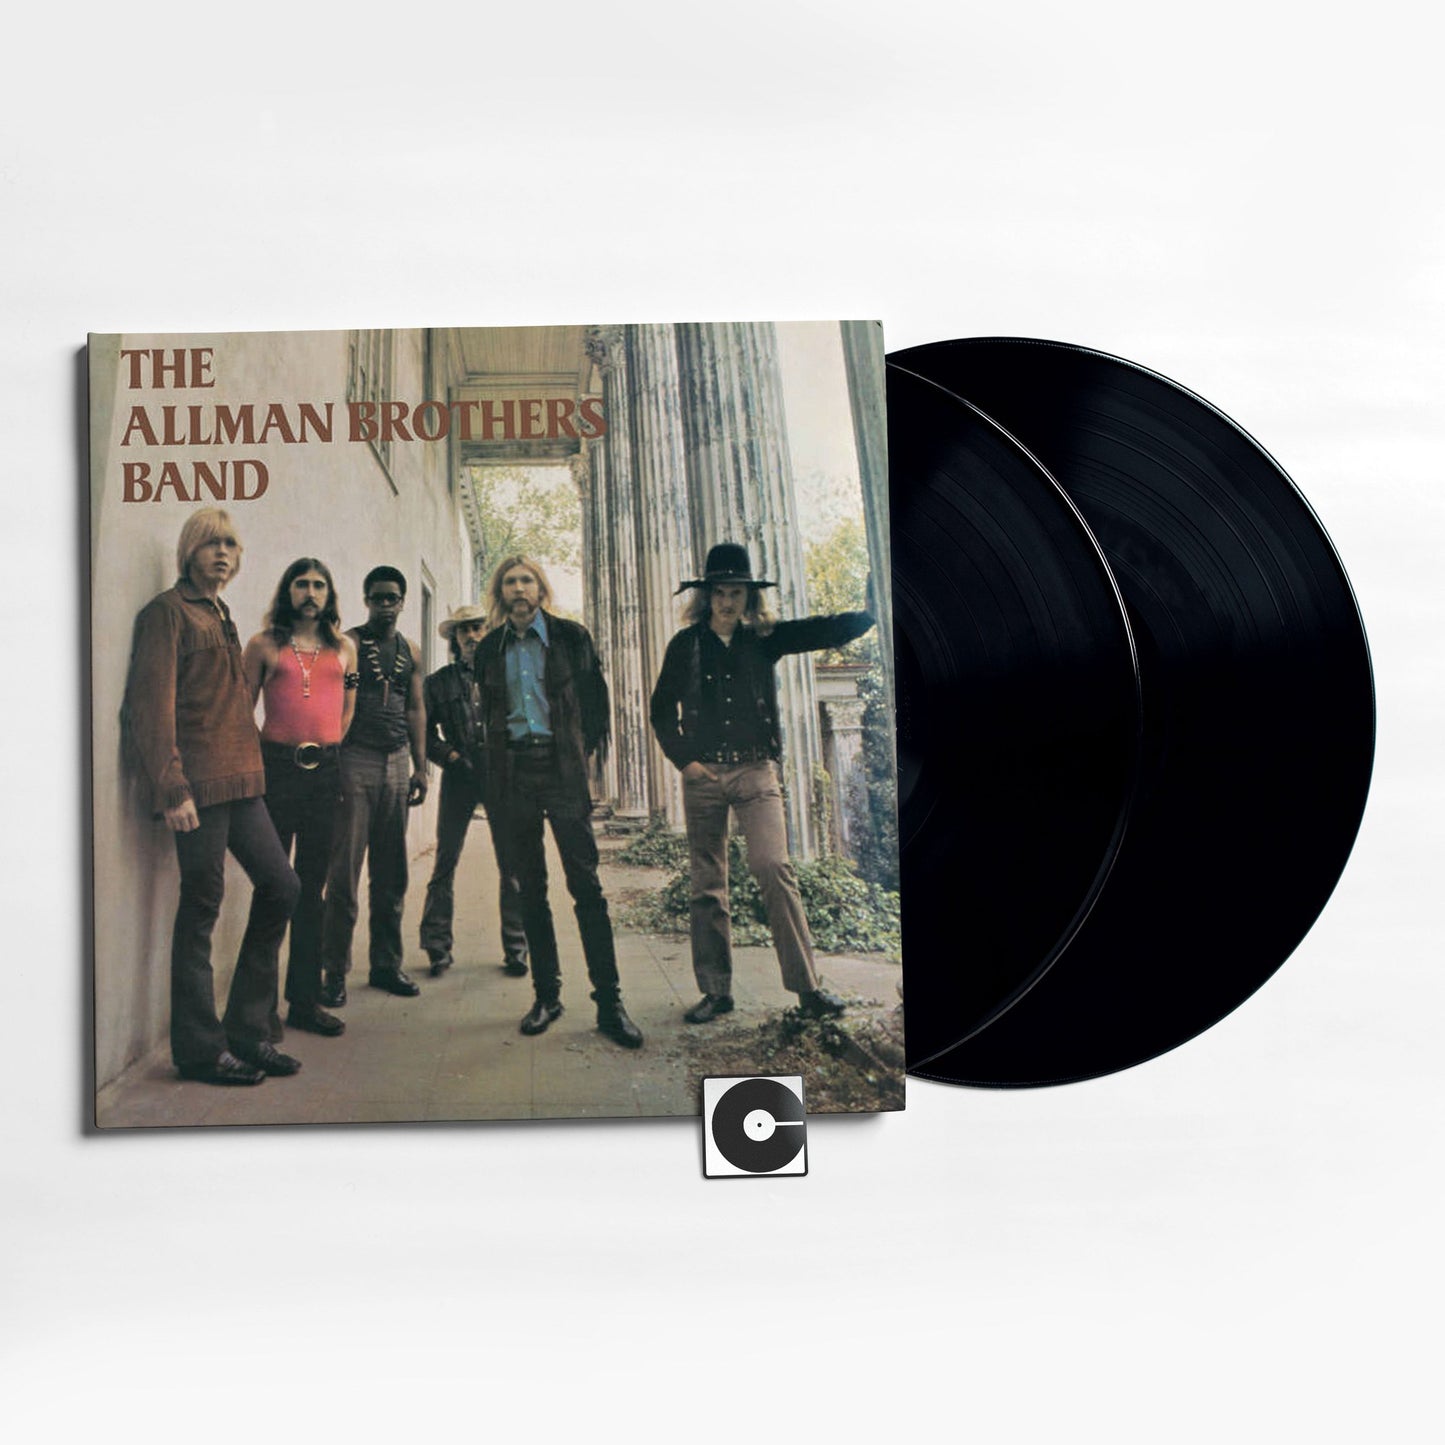 The Allman Brothers Band - "The Allman Brothers Band"